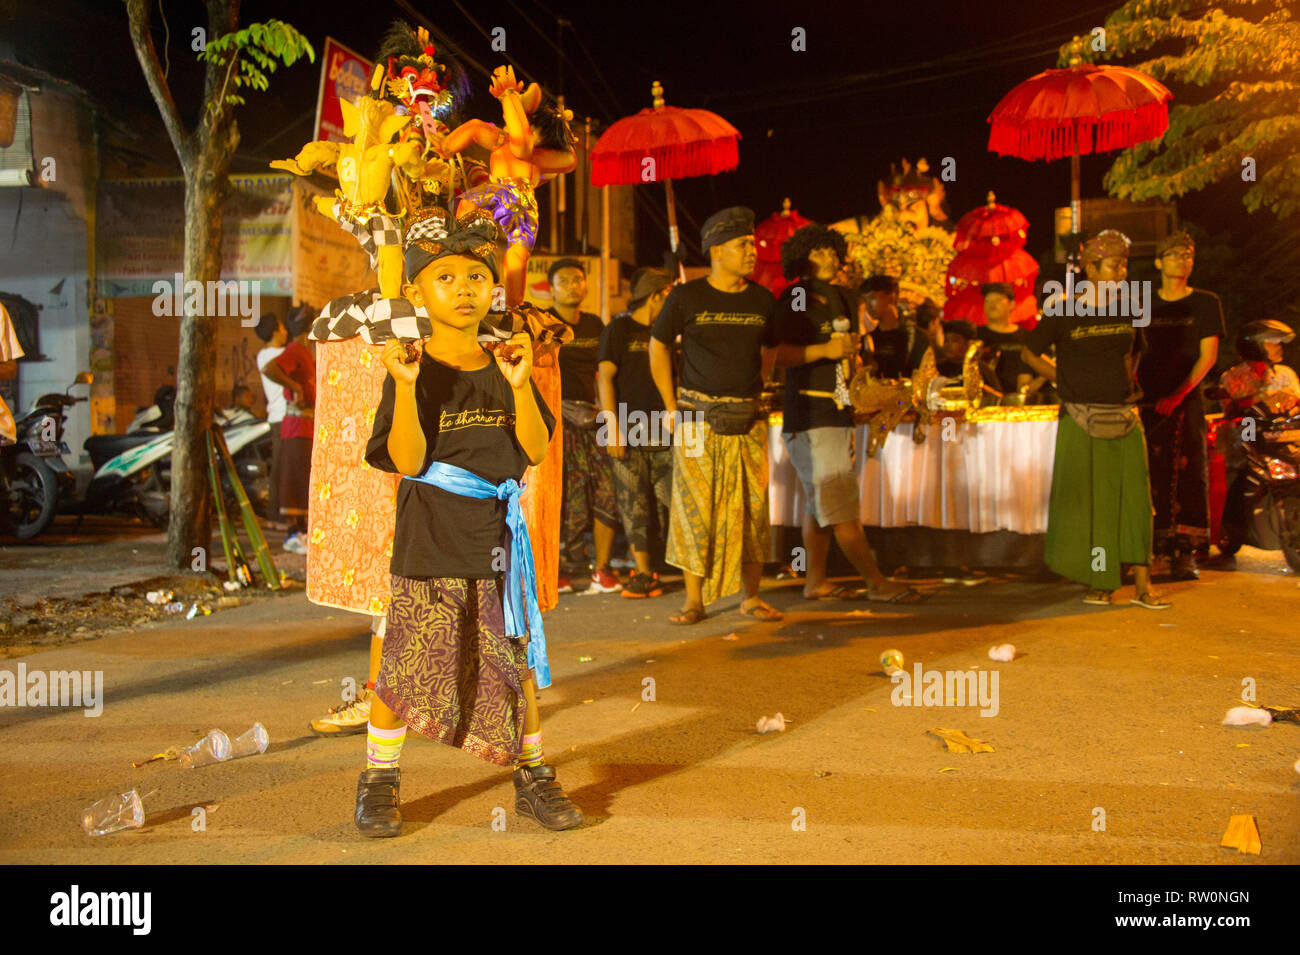 BALI, INDONESIA - MARCH 27, 2017: Boy in traditional costume holding Nyepi figures, traditional parade in evening Kuta street in background Stock Photo